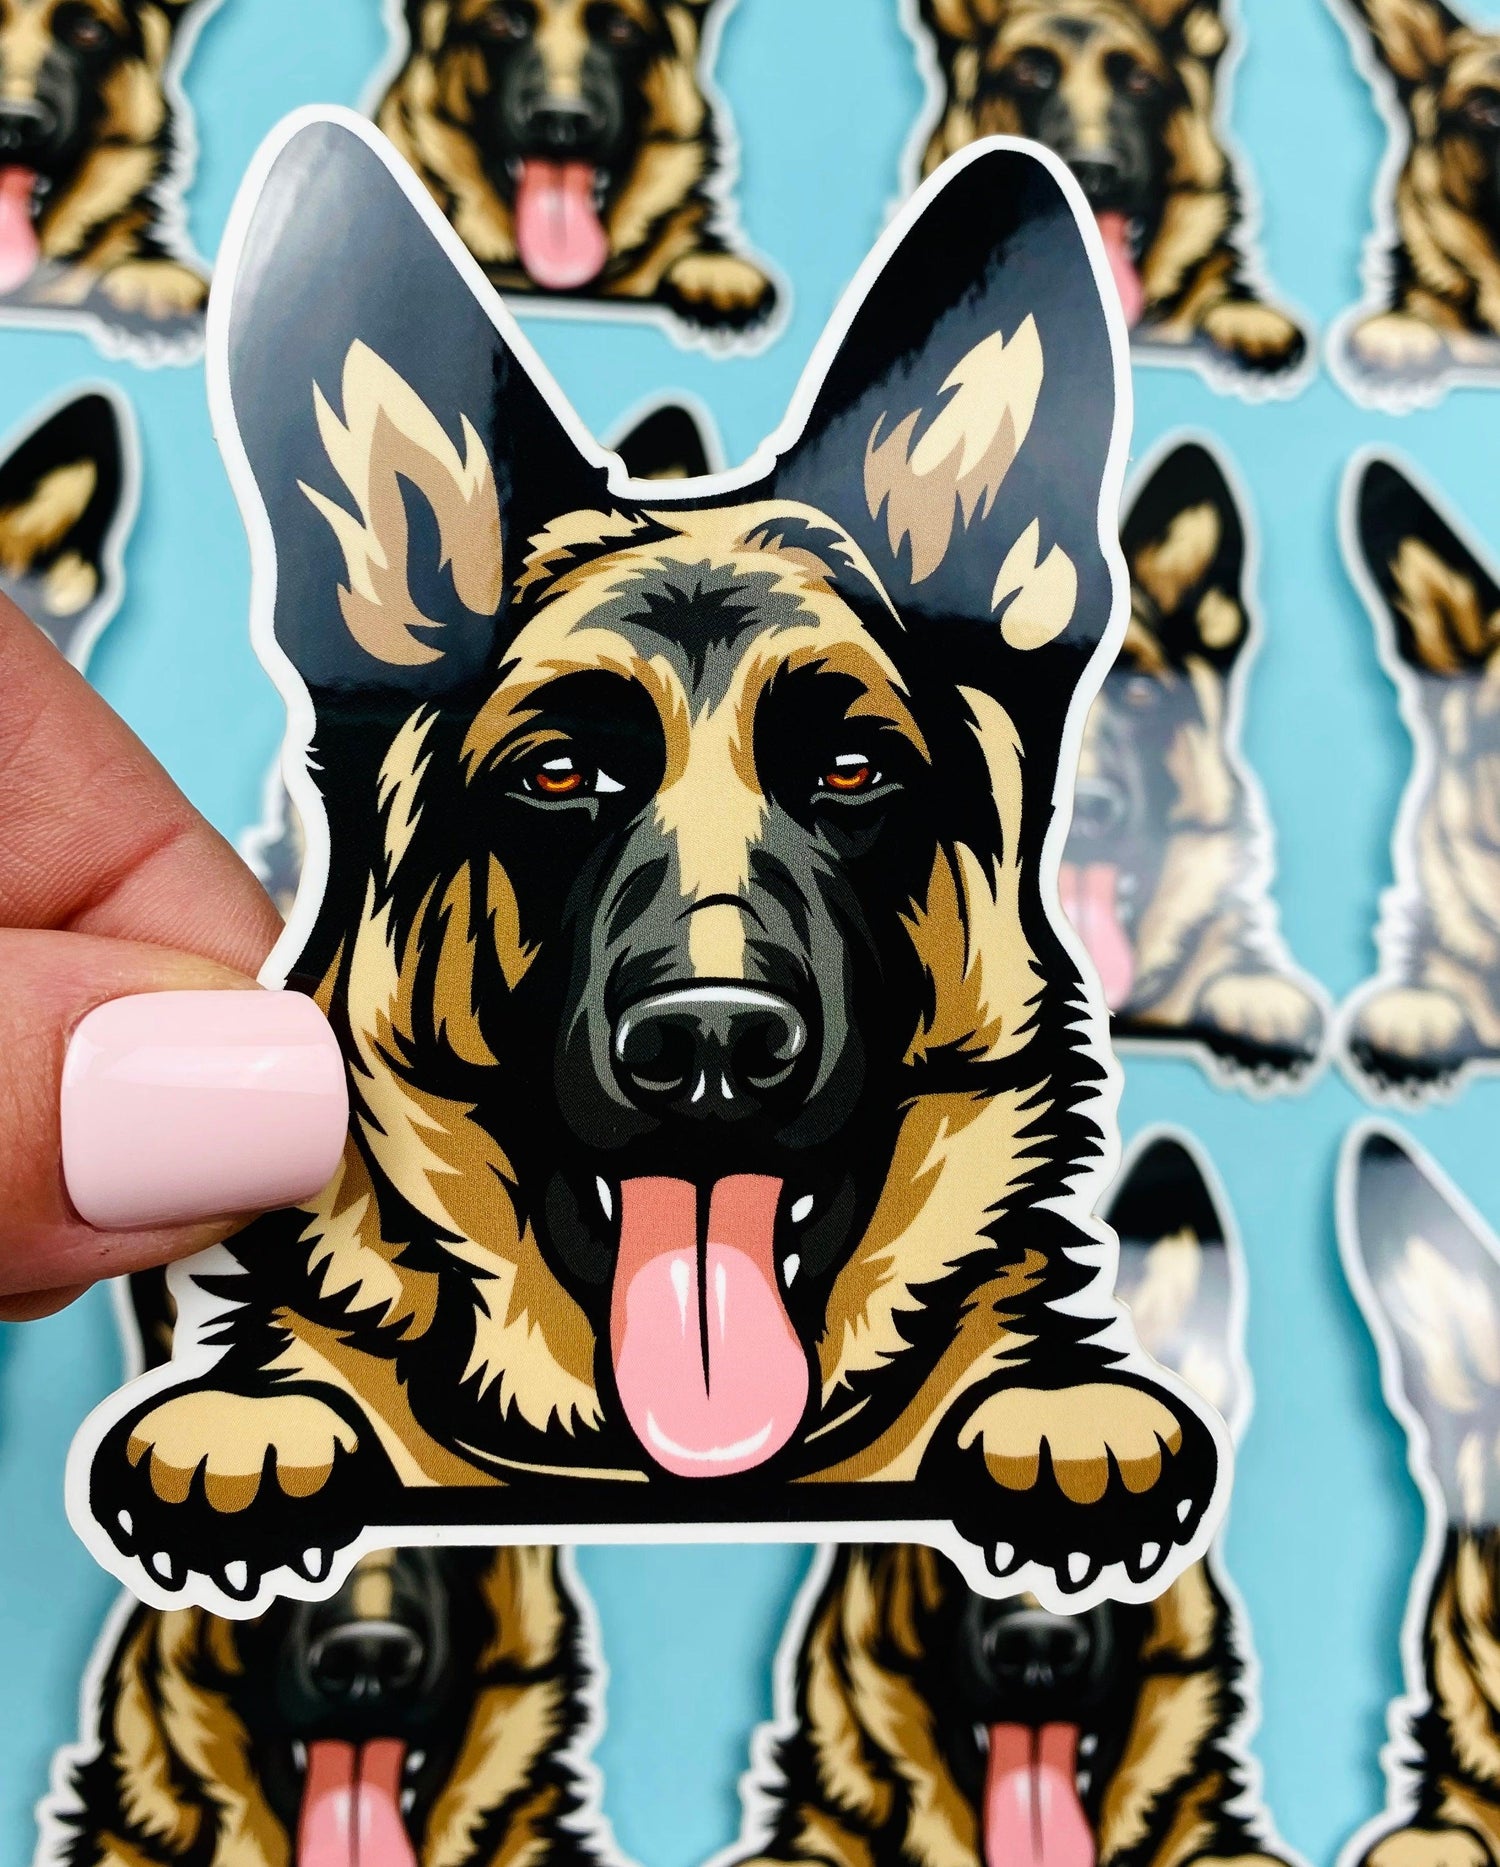 German Shephed Paws Sticker Cute GSD Dog Decal for Car, Hydroflask, Gifts Under 5 for GSD Shepherd Mom Owner, German Shepherd Gift - Ottos Grotto :: Stickers For Your Stuff